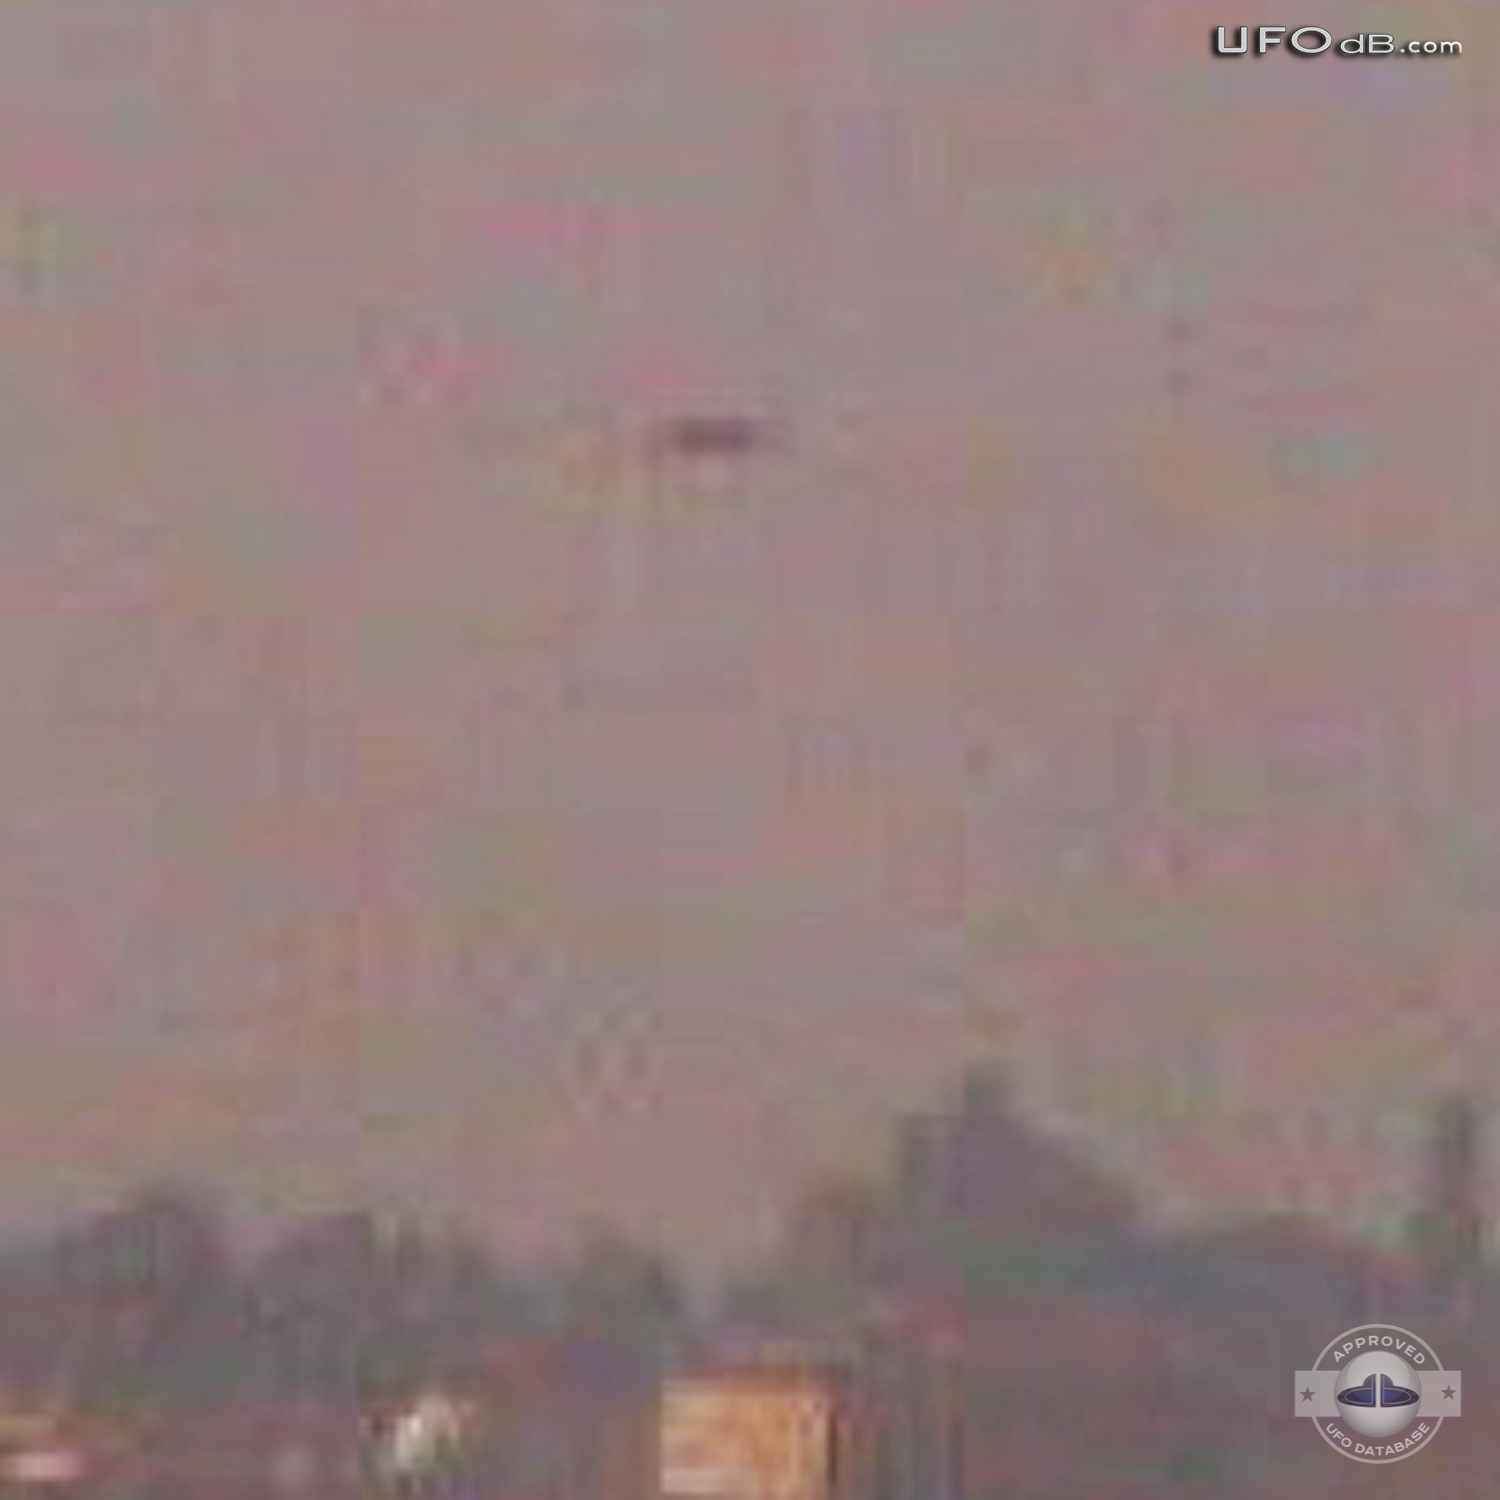 Live cam capture picture of UFO over Vatican city | Italy | May 6 2011 UFO Picture #285-3